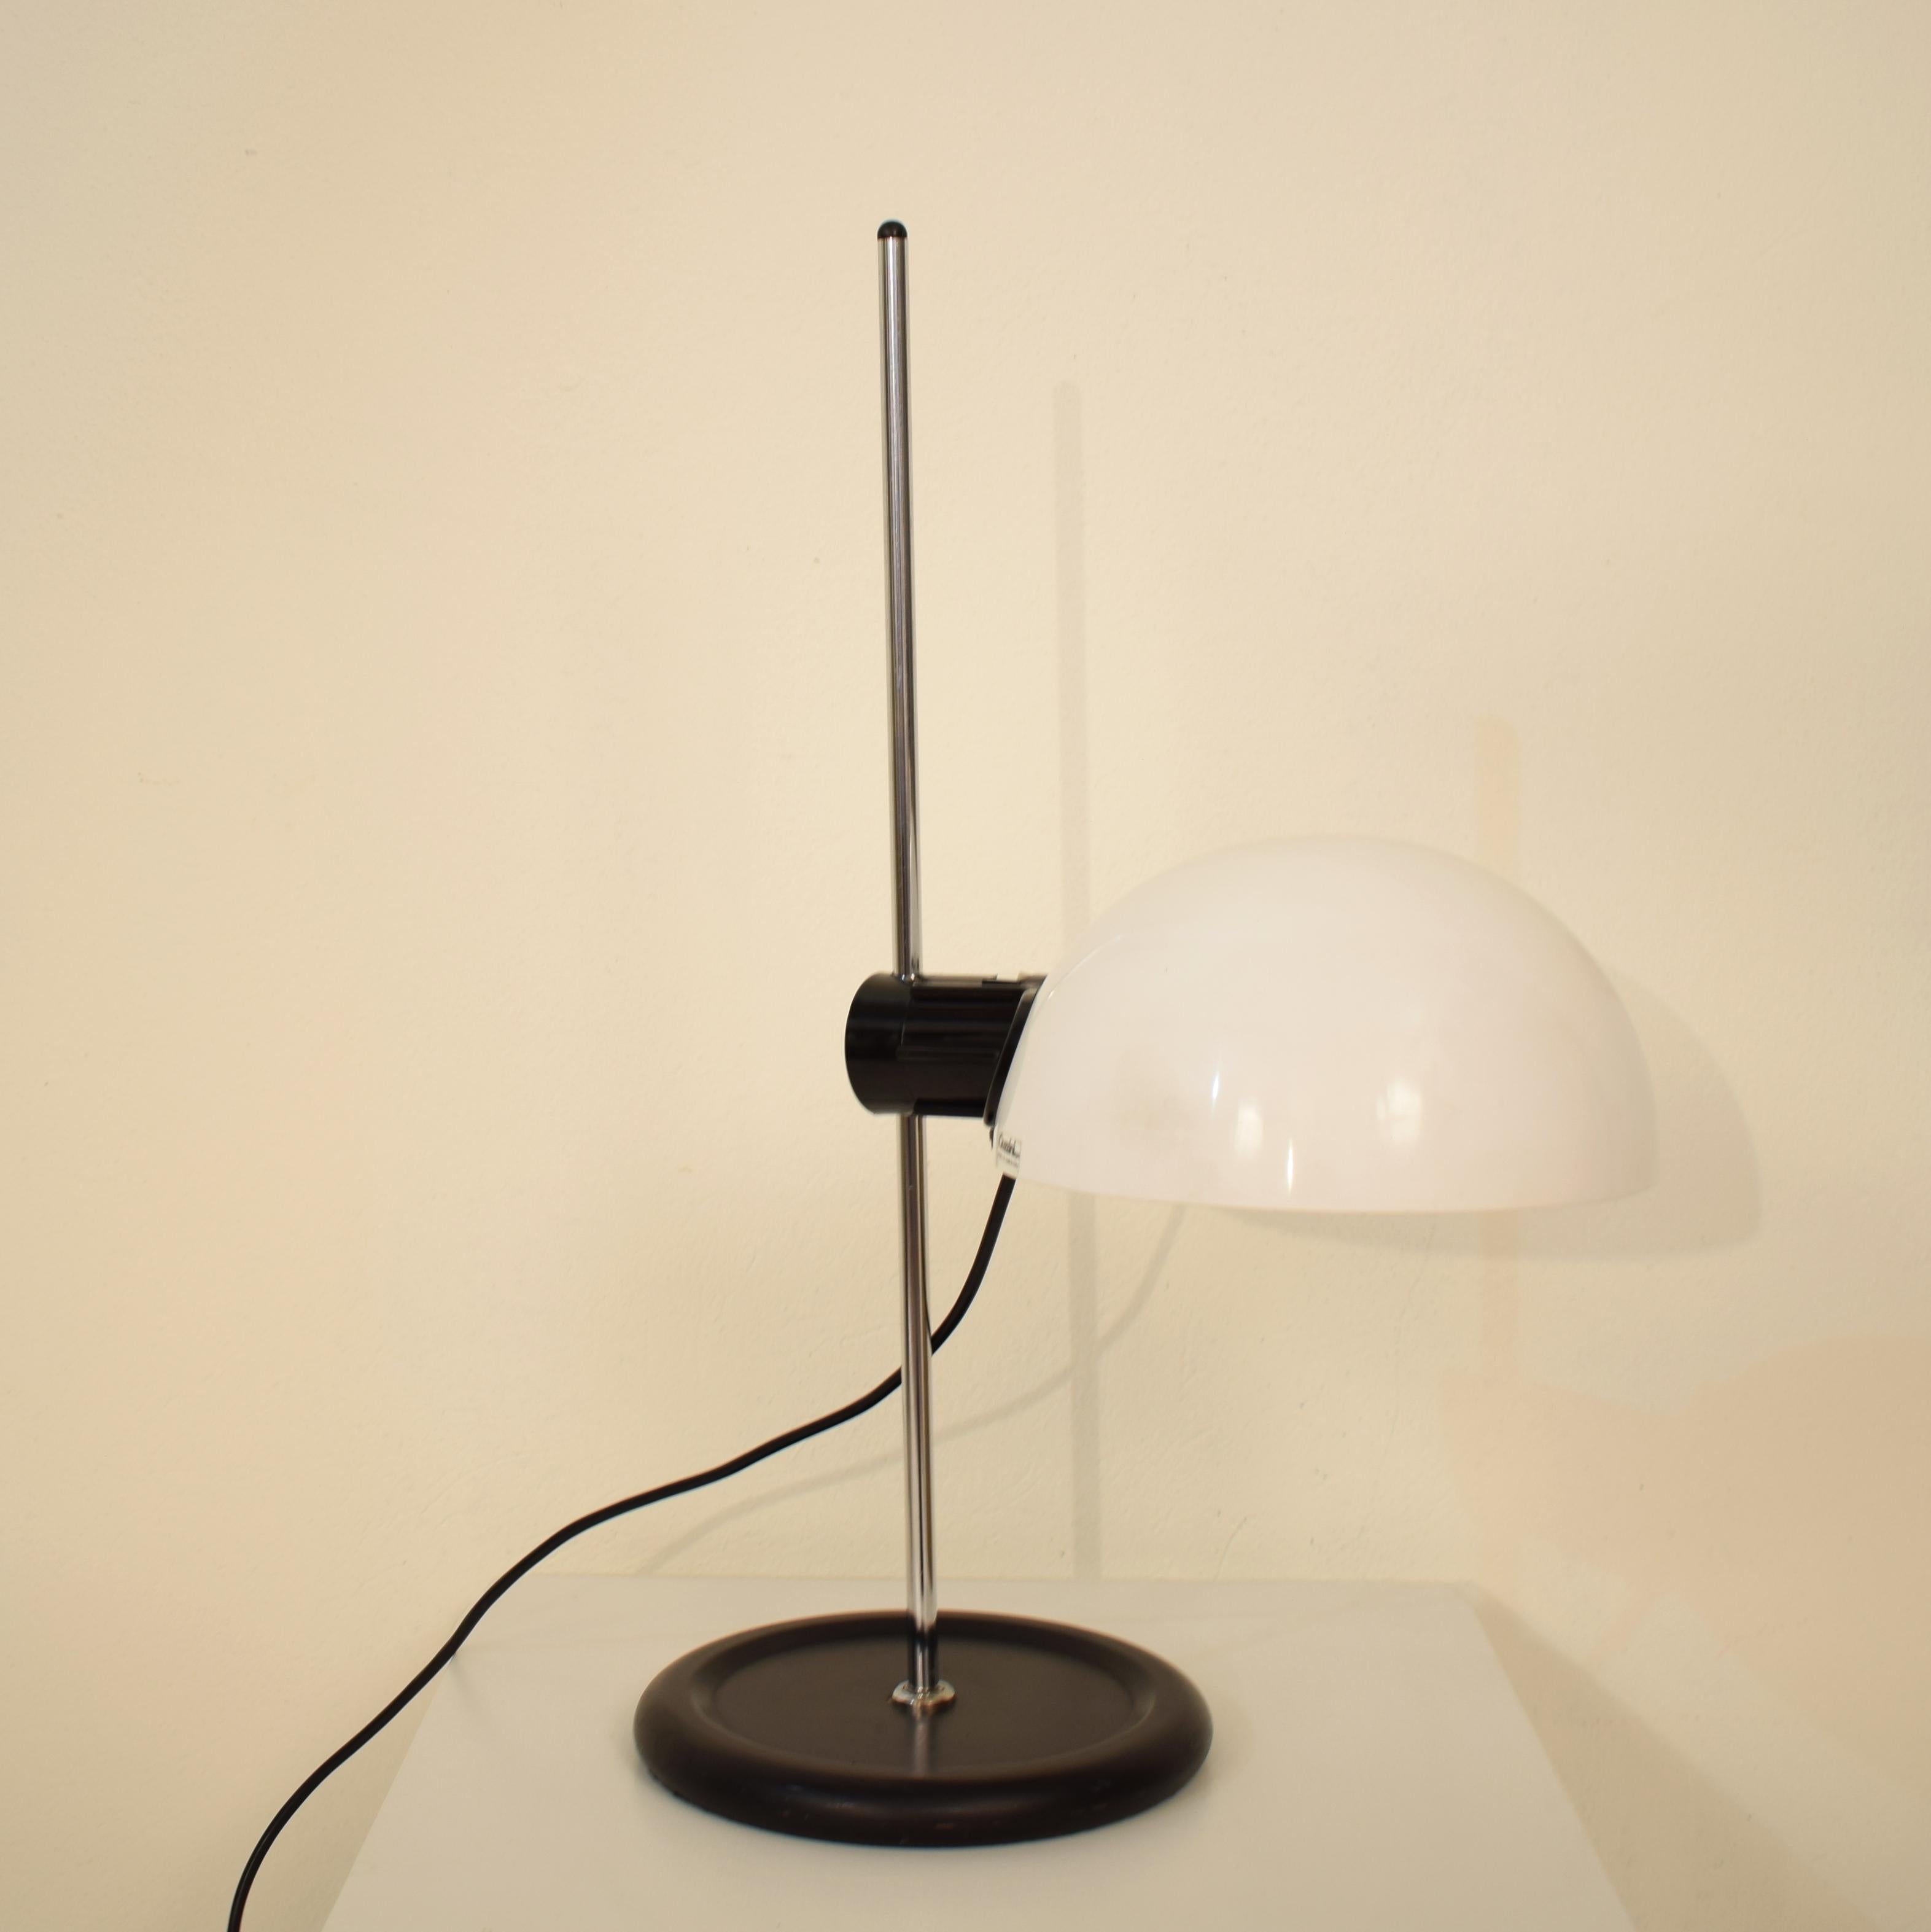 Midcentury Black and White Table Lamp Model Libellula by Harvey Guzzini, 1970s For Sale 4